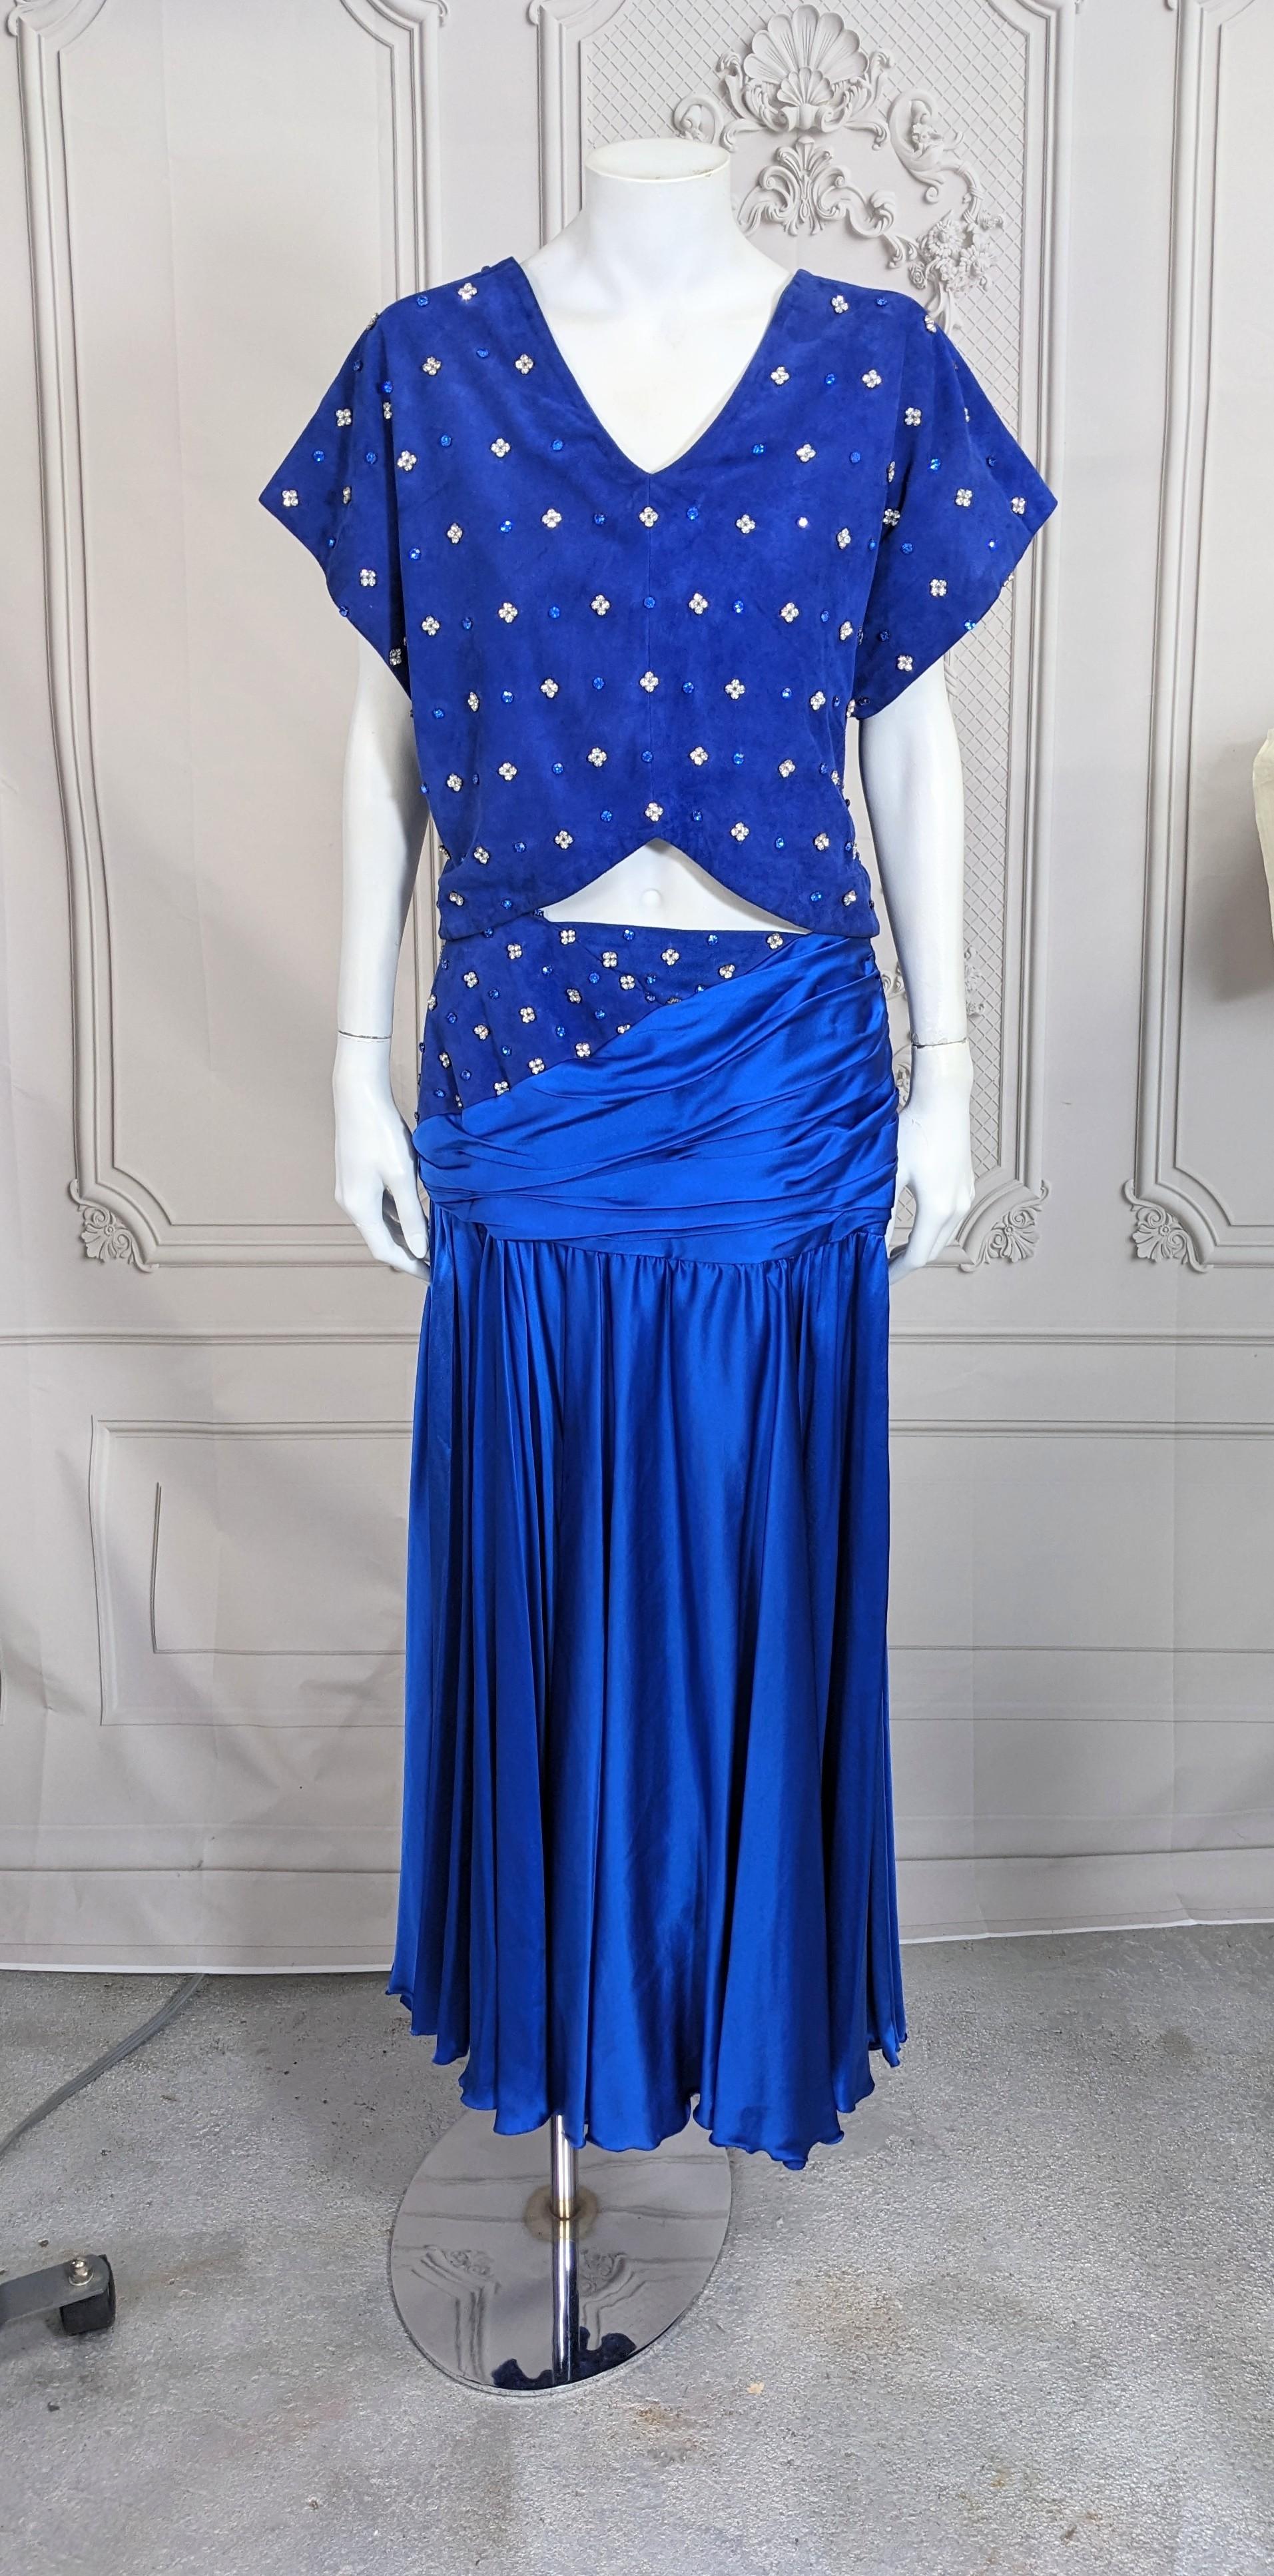 Extravagant Jiki, Monaco Studded Suede and Satin Ensemble from the 1990's. Royal blue suede cropped top set with pave rhinestones in crystal and blue. Matching skirt has a matching studded suede yoke draped with satin and full circle skirt. Pieces